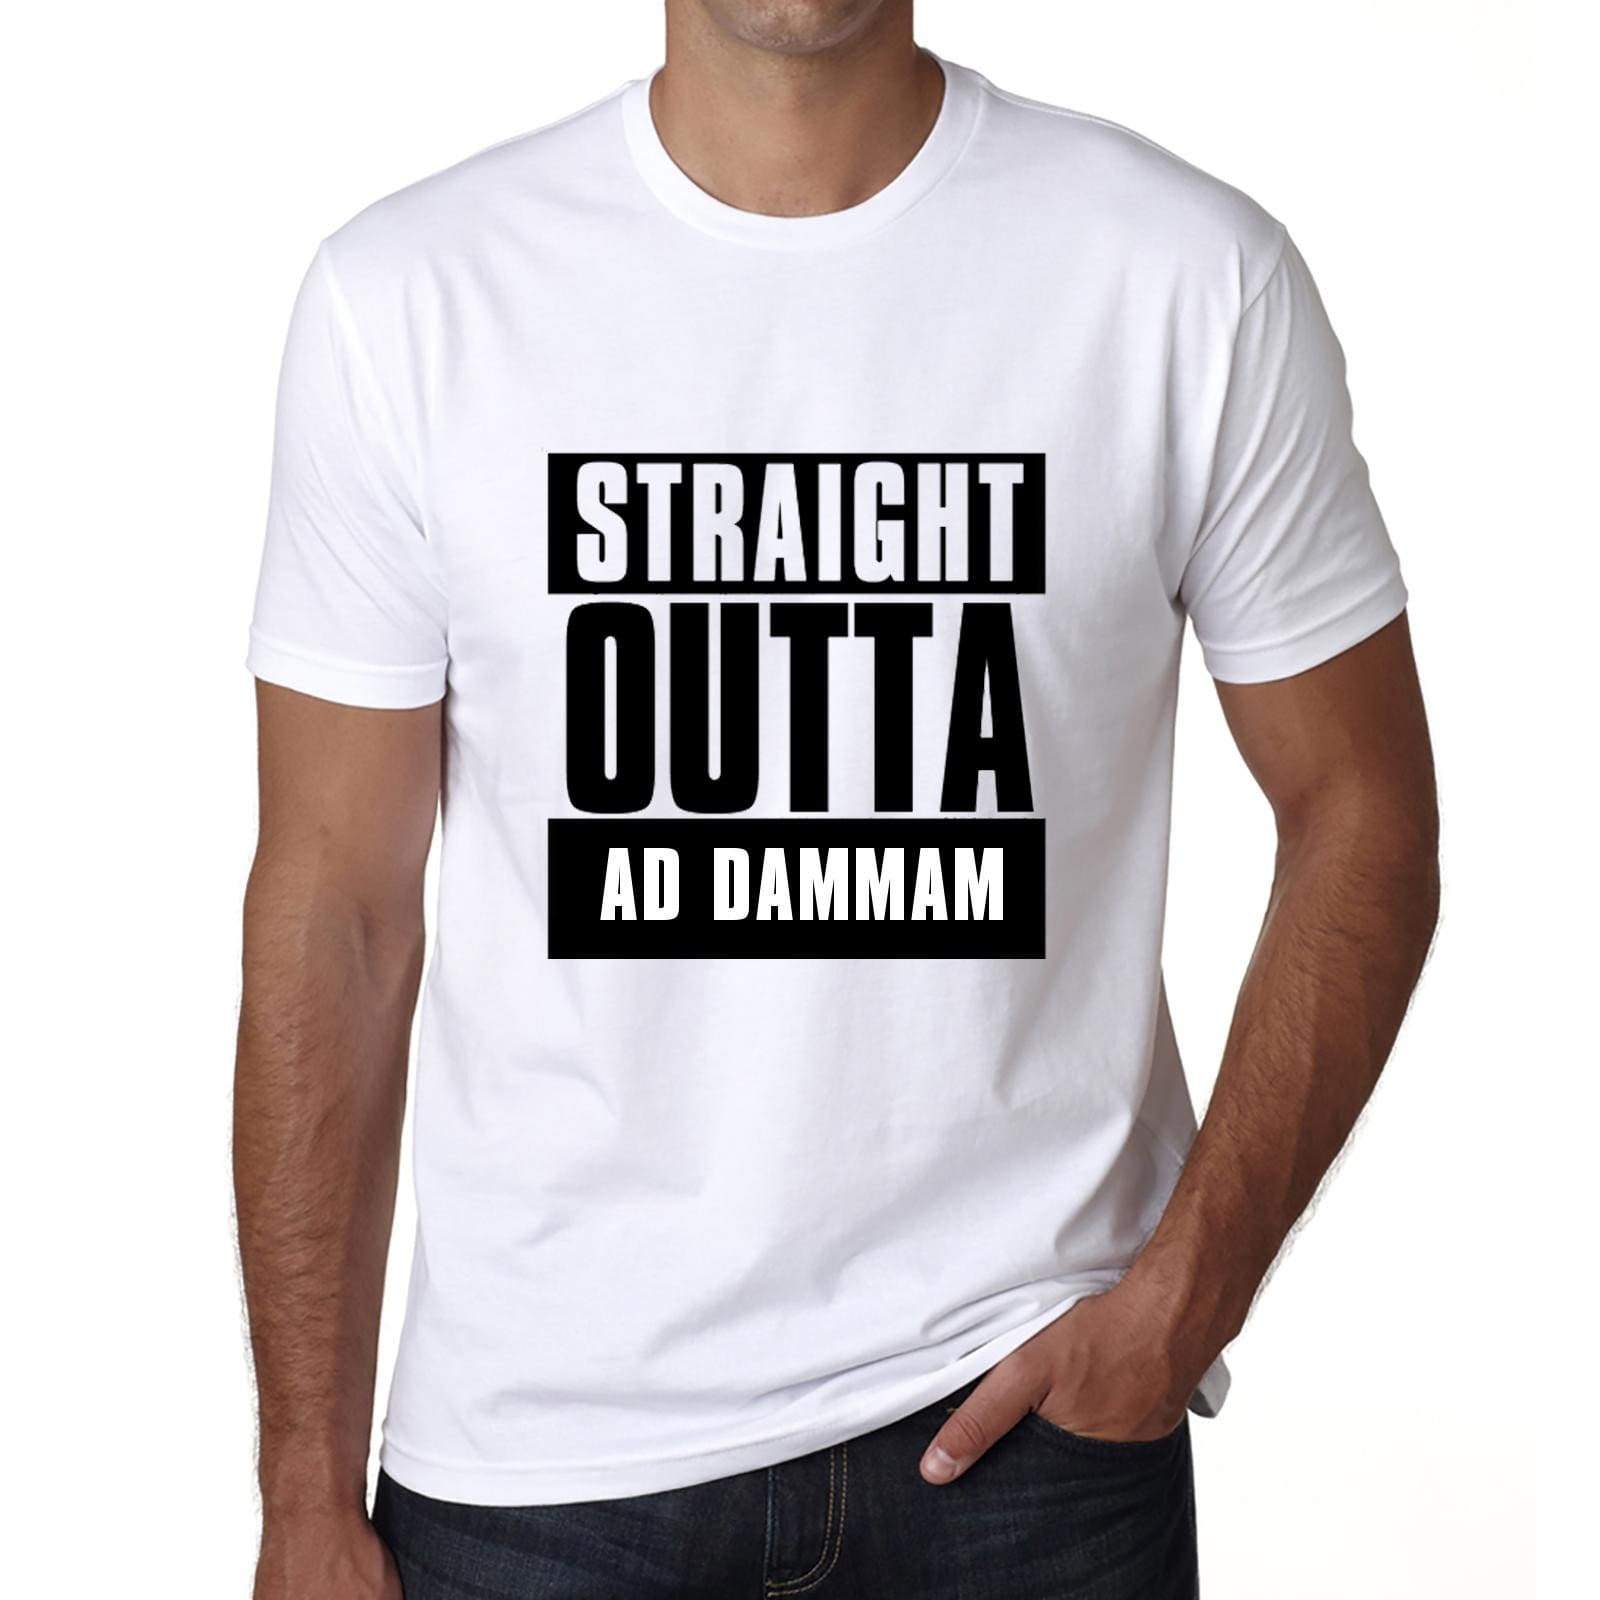 Straight Outta Ad Dammam Mens Short Sleeve Round Neck T-Shirt 00027 - White / S - Casual